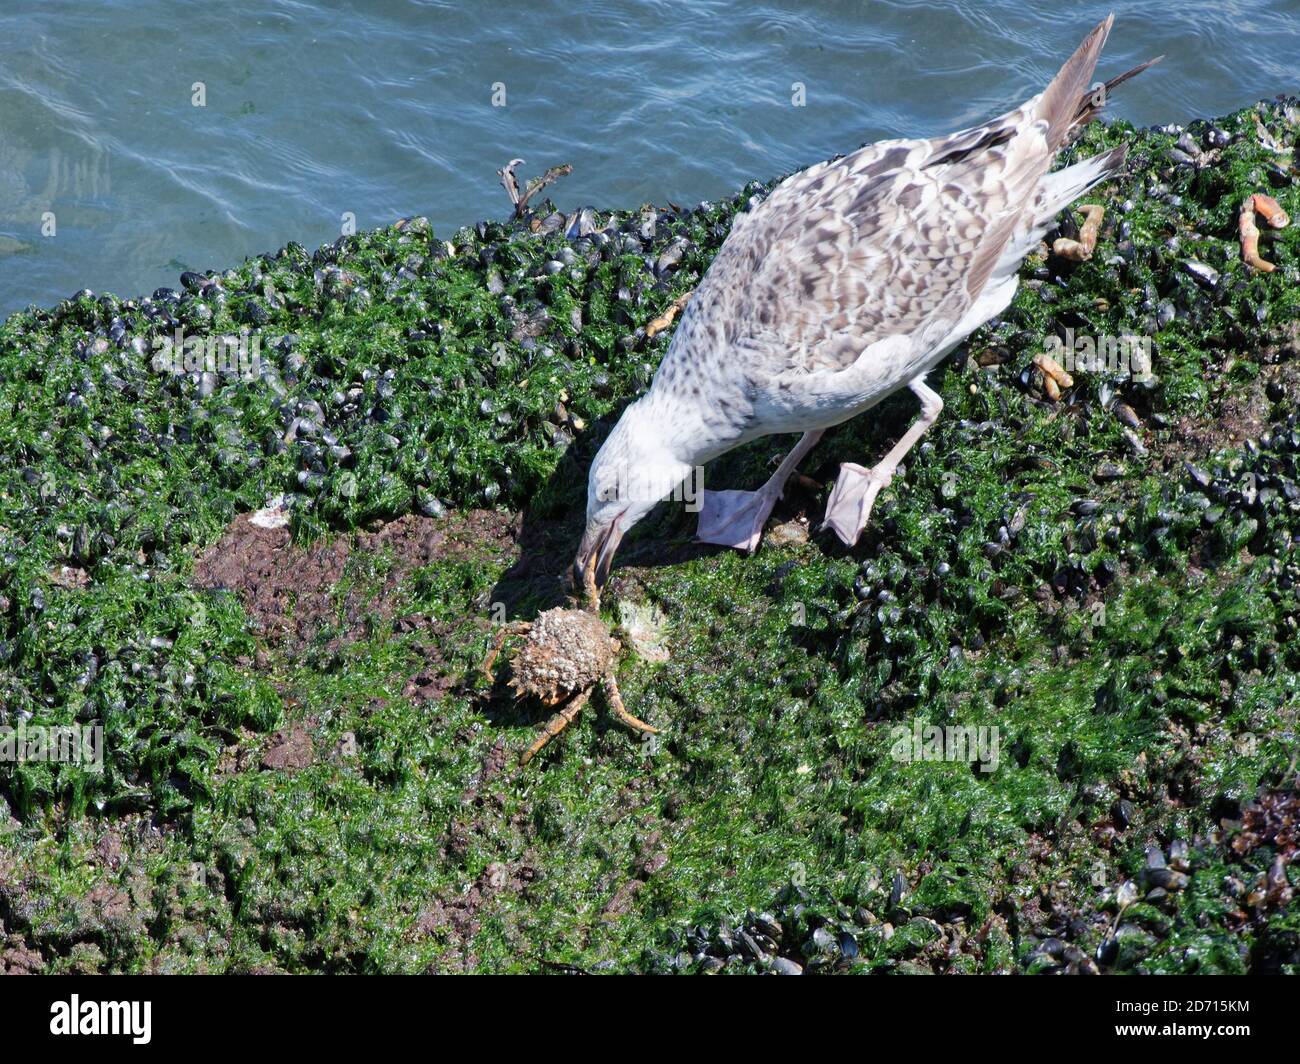 Great black-backed gull (Larus marinus) juvenile grasping a Spiny spider crab (Maja squinado) it has just caught by a back leg at low tide, Wales, UK. Stock Photo